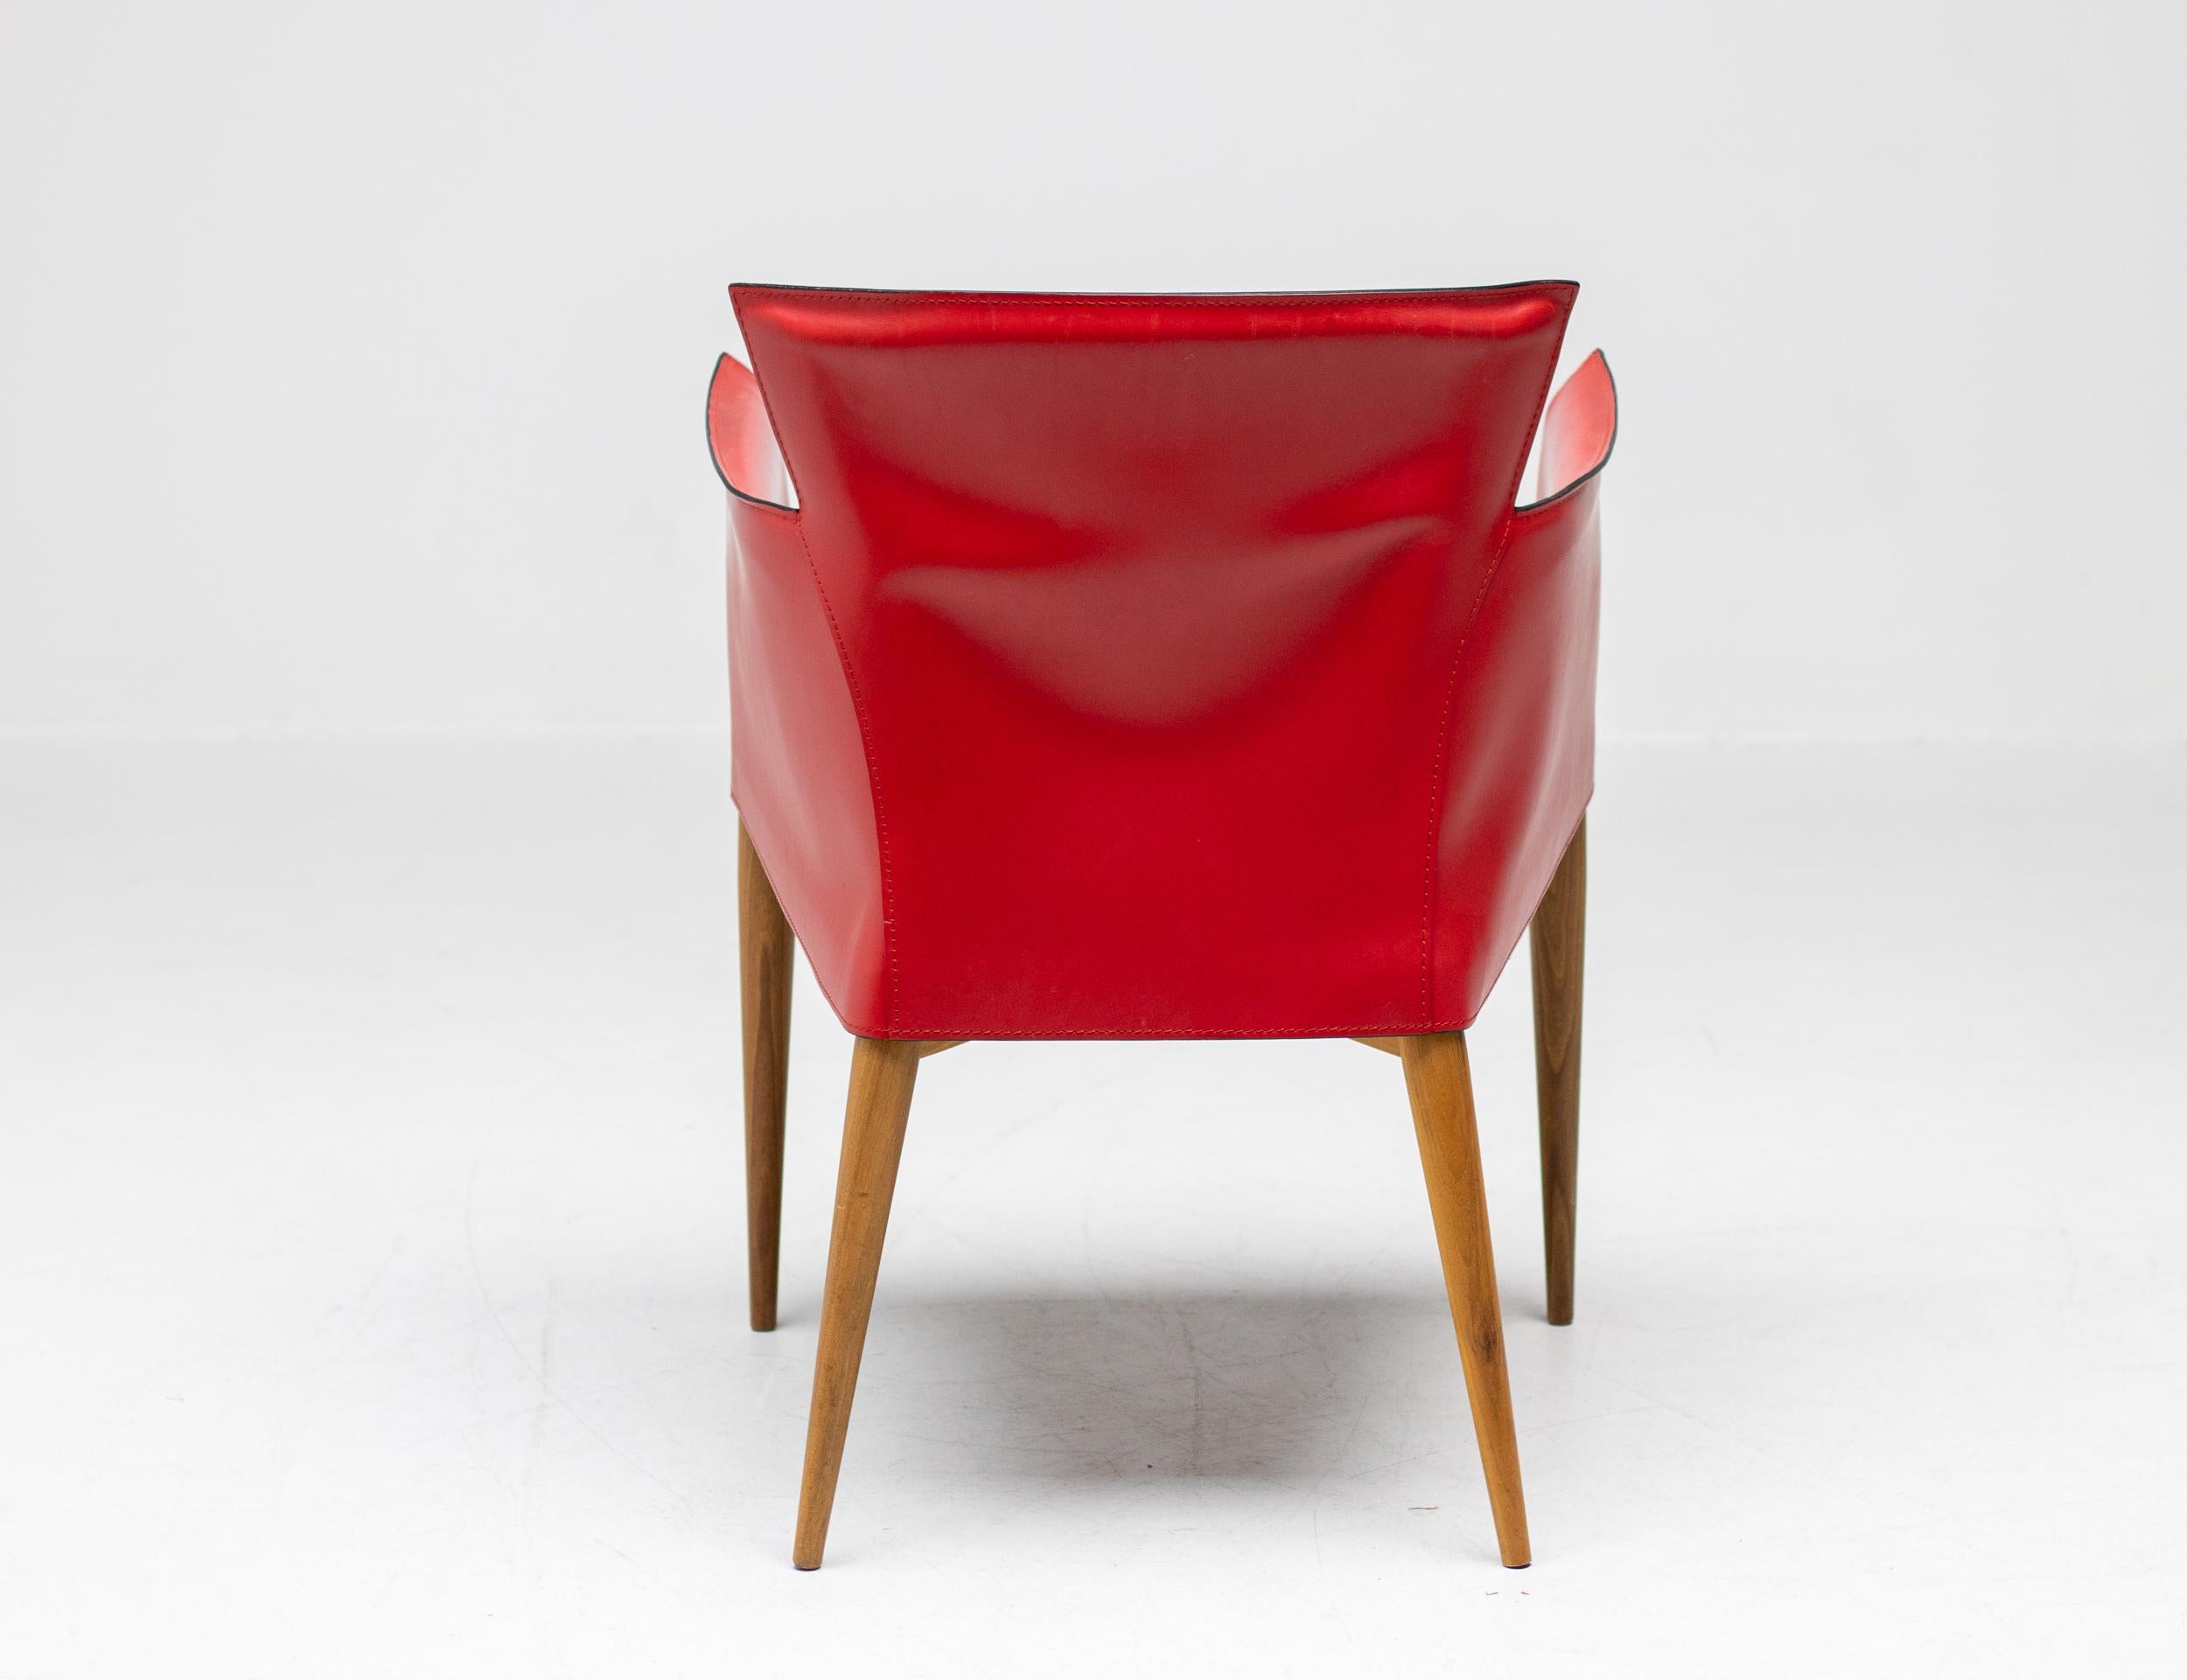 Rare Carlo Bartoli for Matteo Grassi Vela armchairs in red Italian leather, made in Italy, circa 1980.
High-end chair consisting of handstitched leather upholstery wrapped over an internal walnut frame. 
The design of this chair is inspired by how